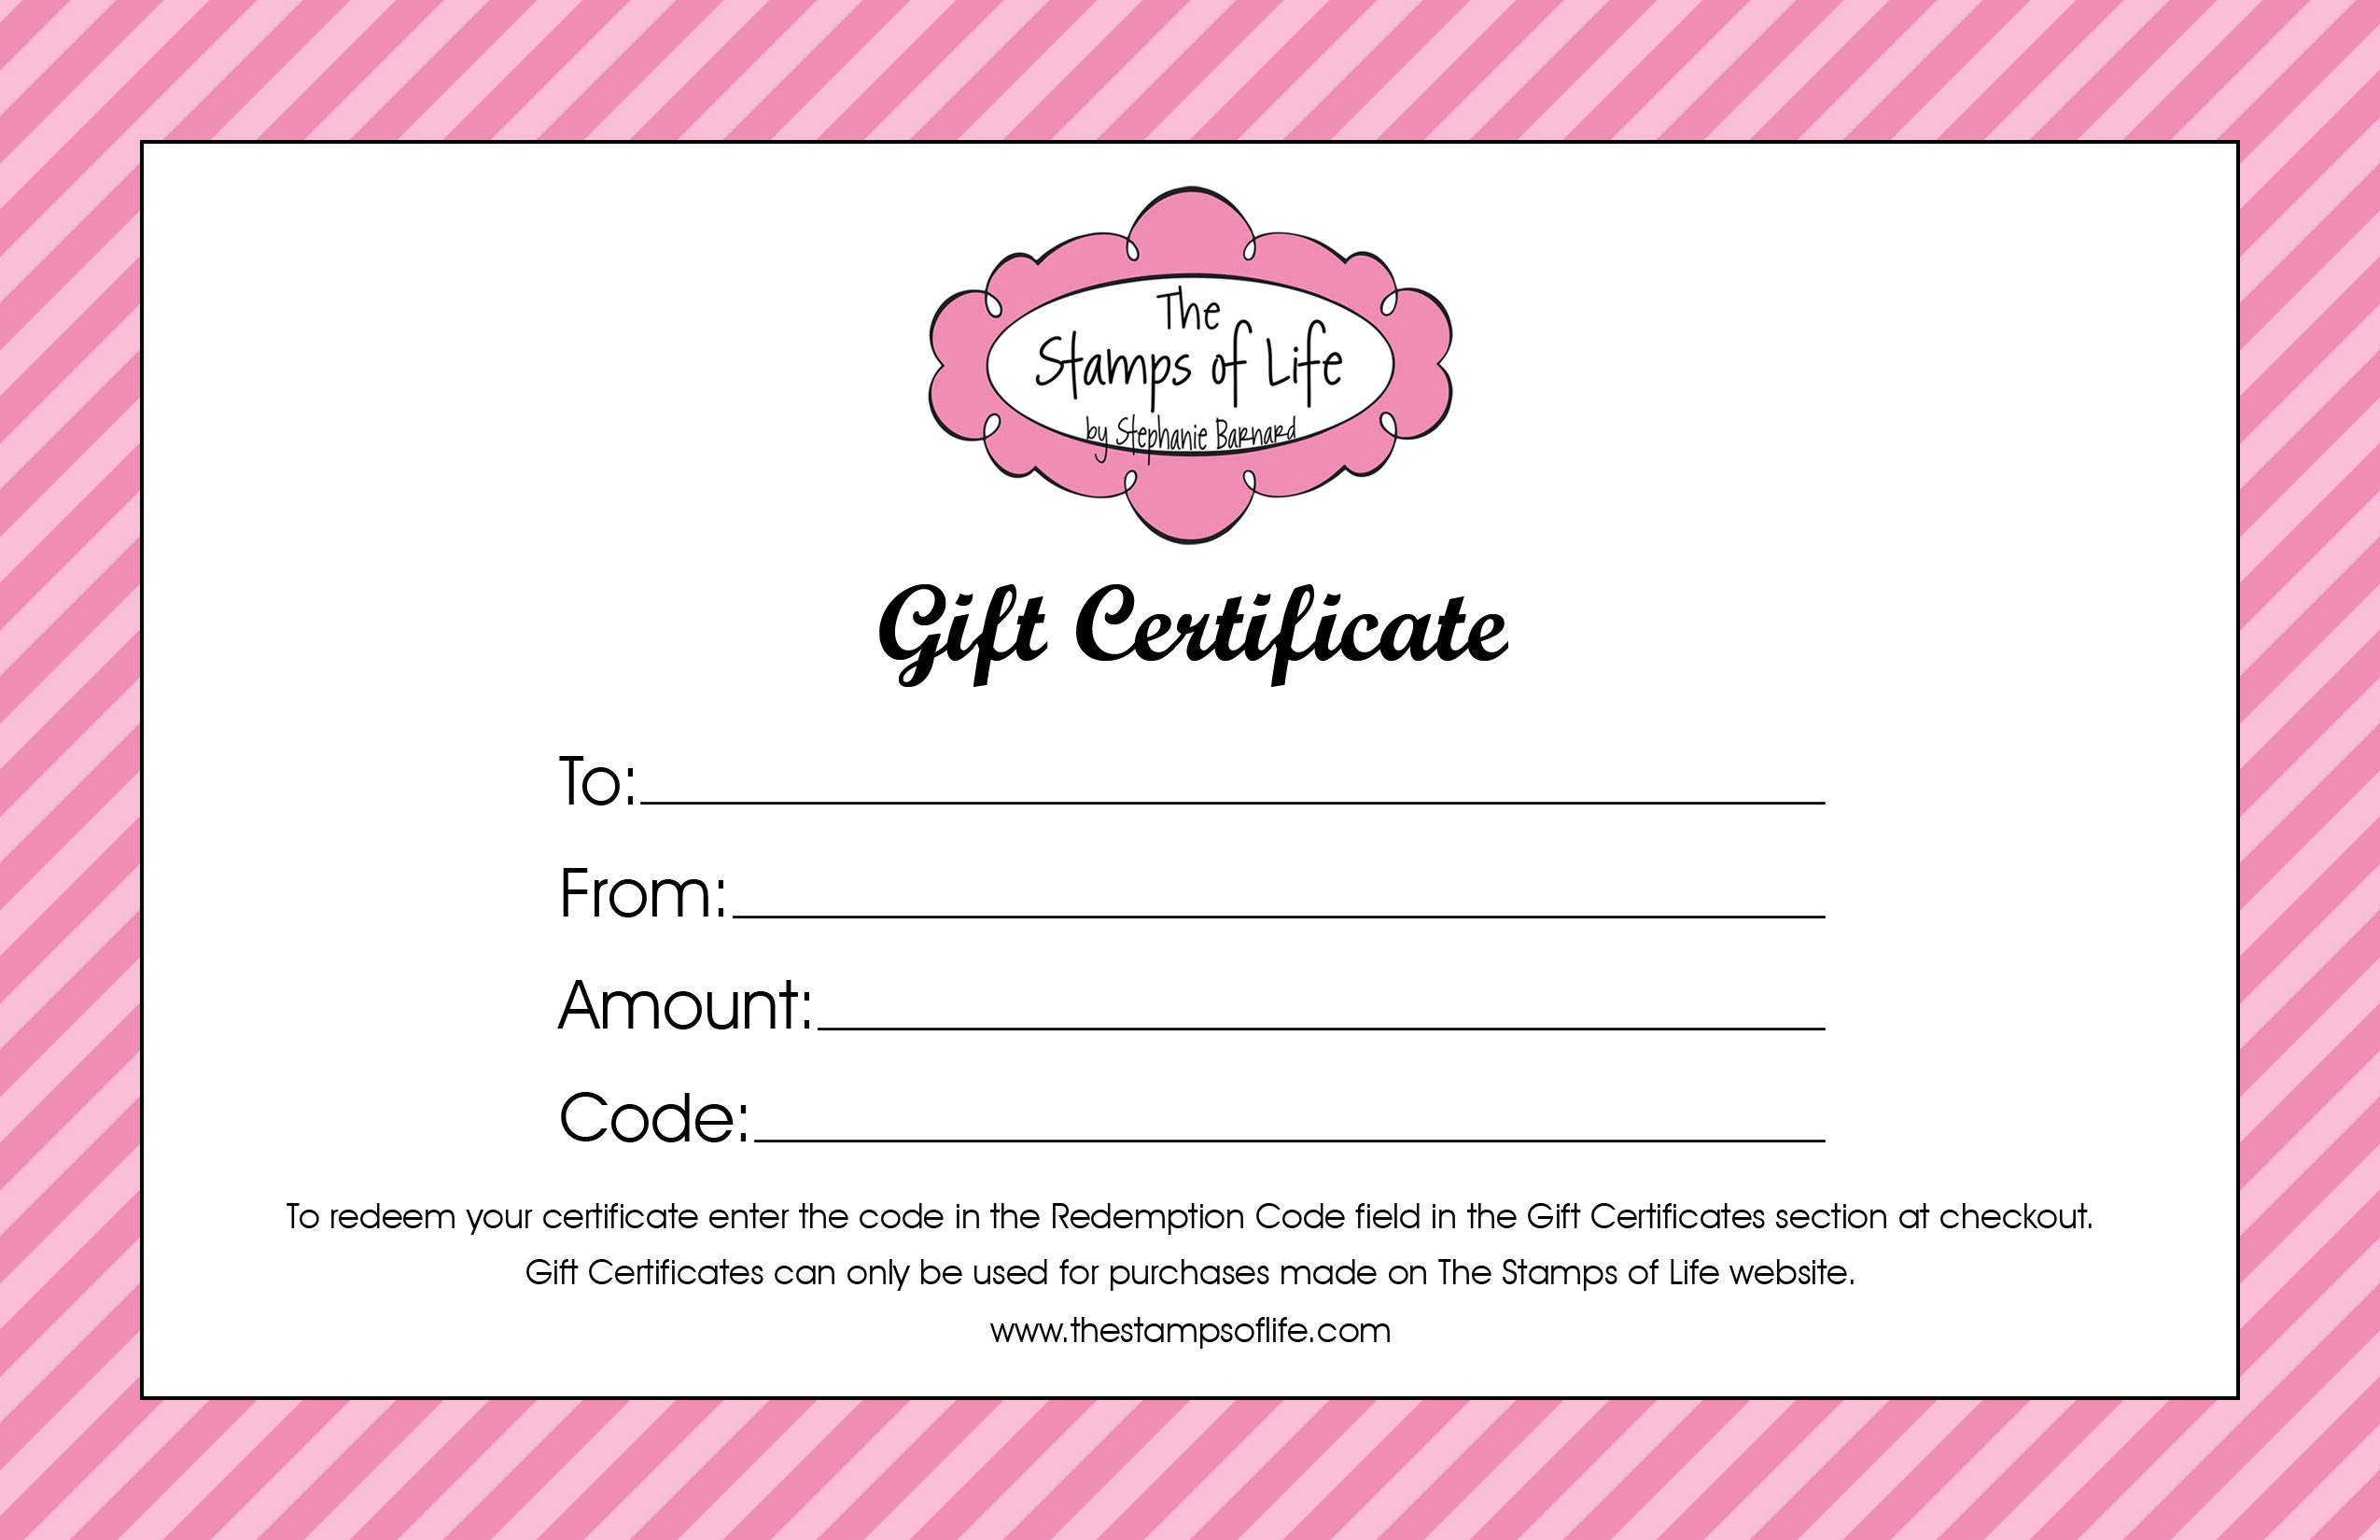 downloadable word travel gift certificate template free